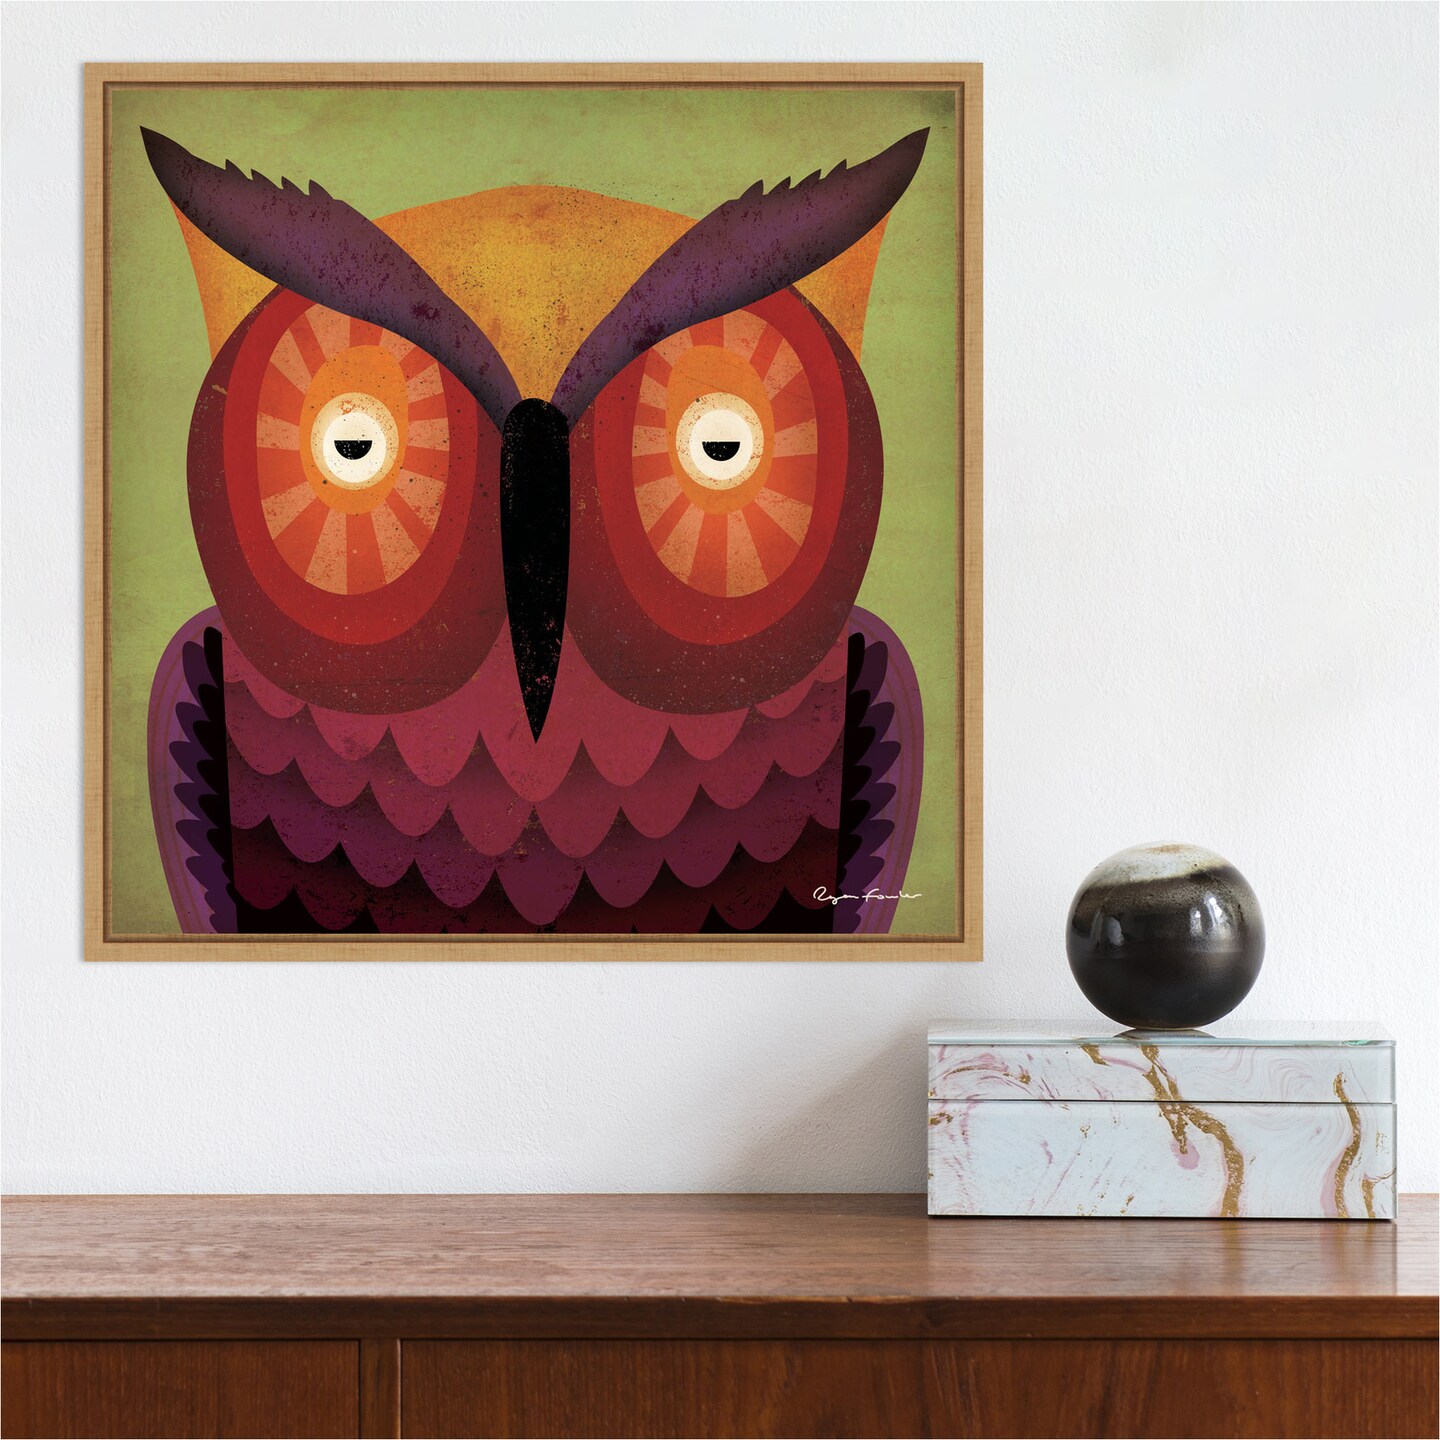 Owl by Ryan Fowler 16-in. W x 16-in. H. Canvas Wall Art Print Framed in Natural